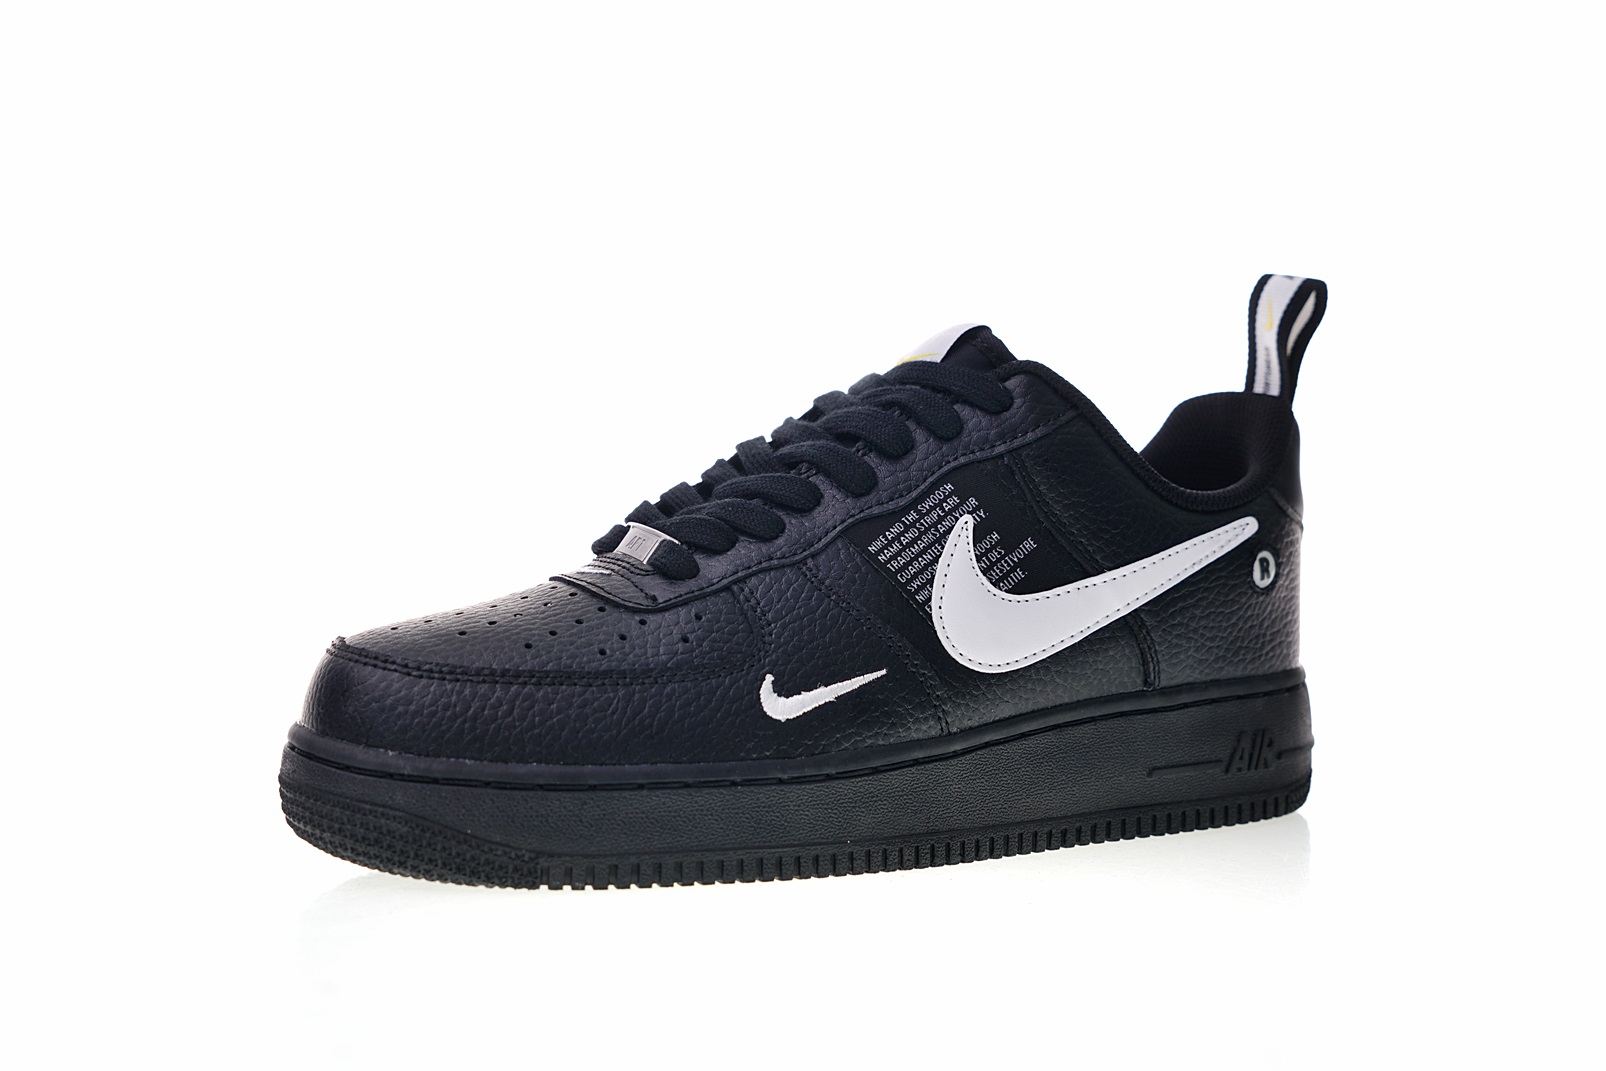 nike legend trainer gray and yellow color - Zapasgo - Nike Air Force 1 07 LV8 Utility Negro